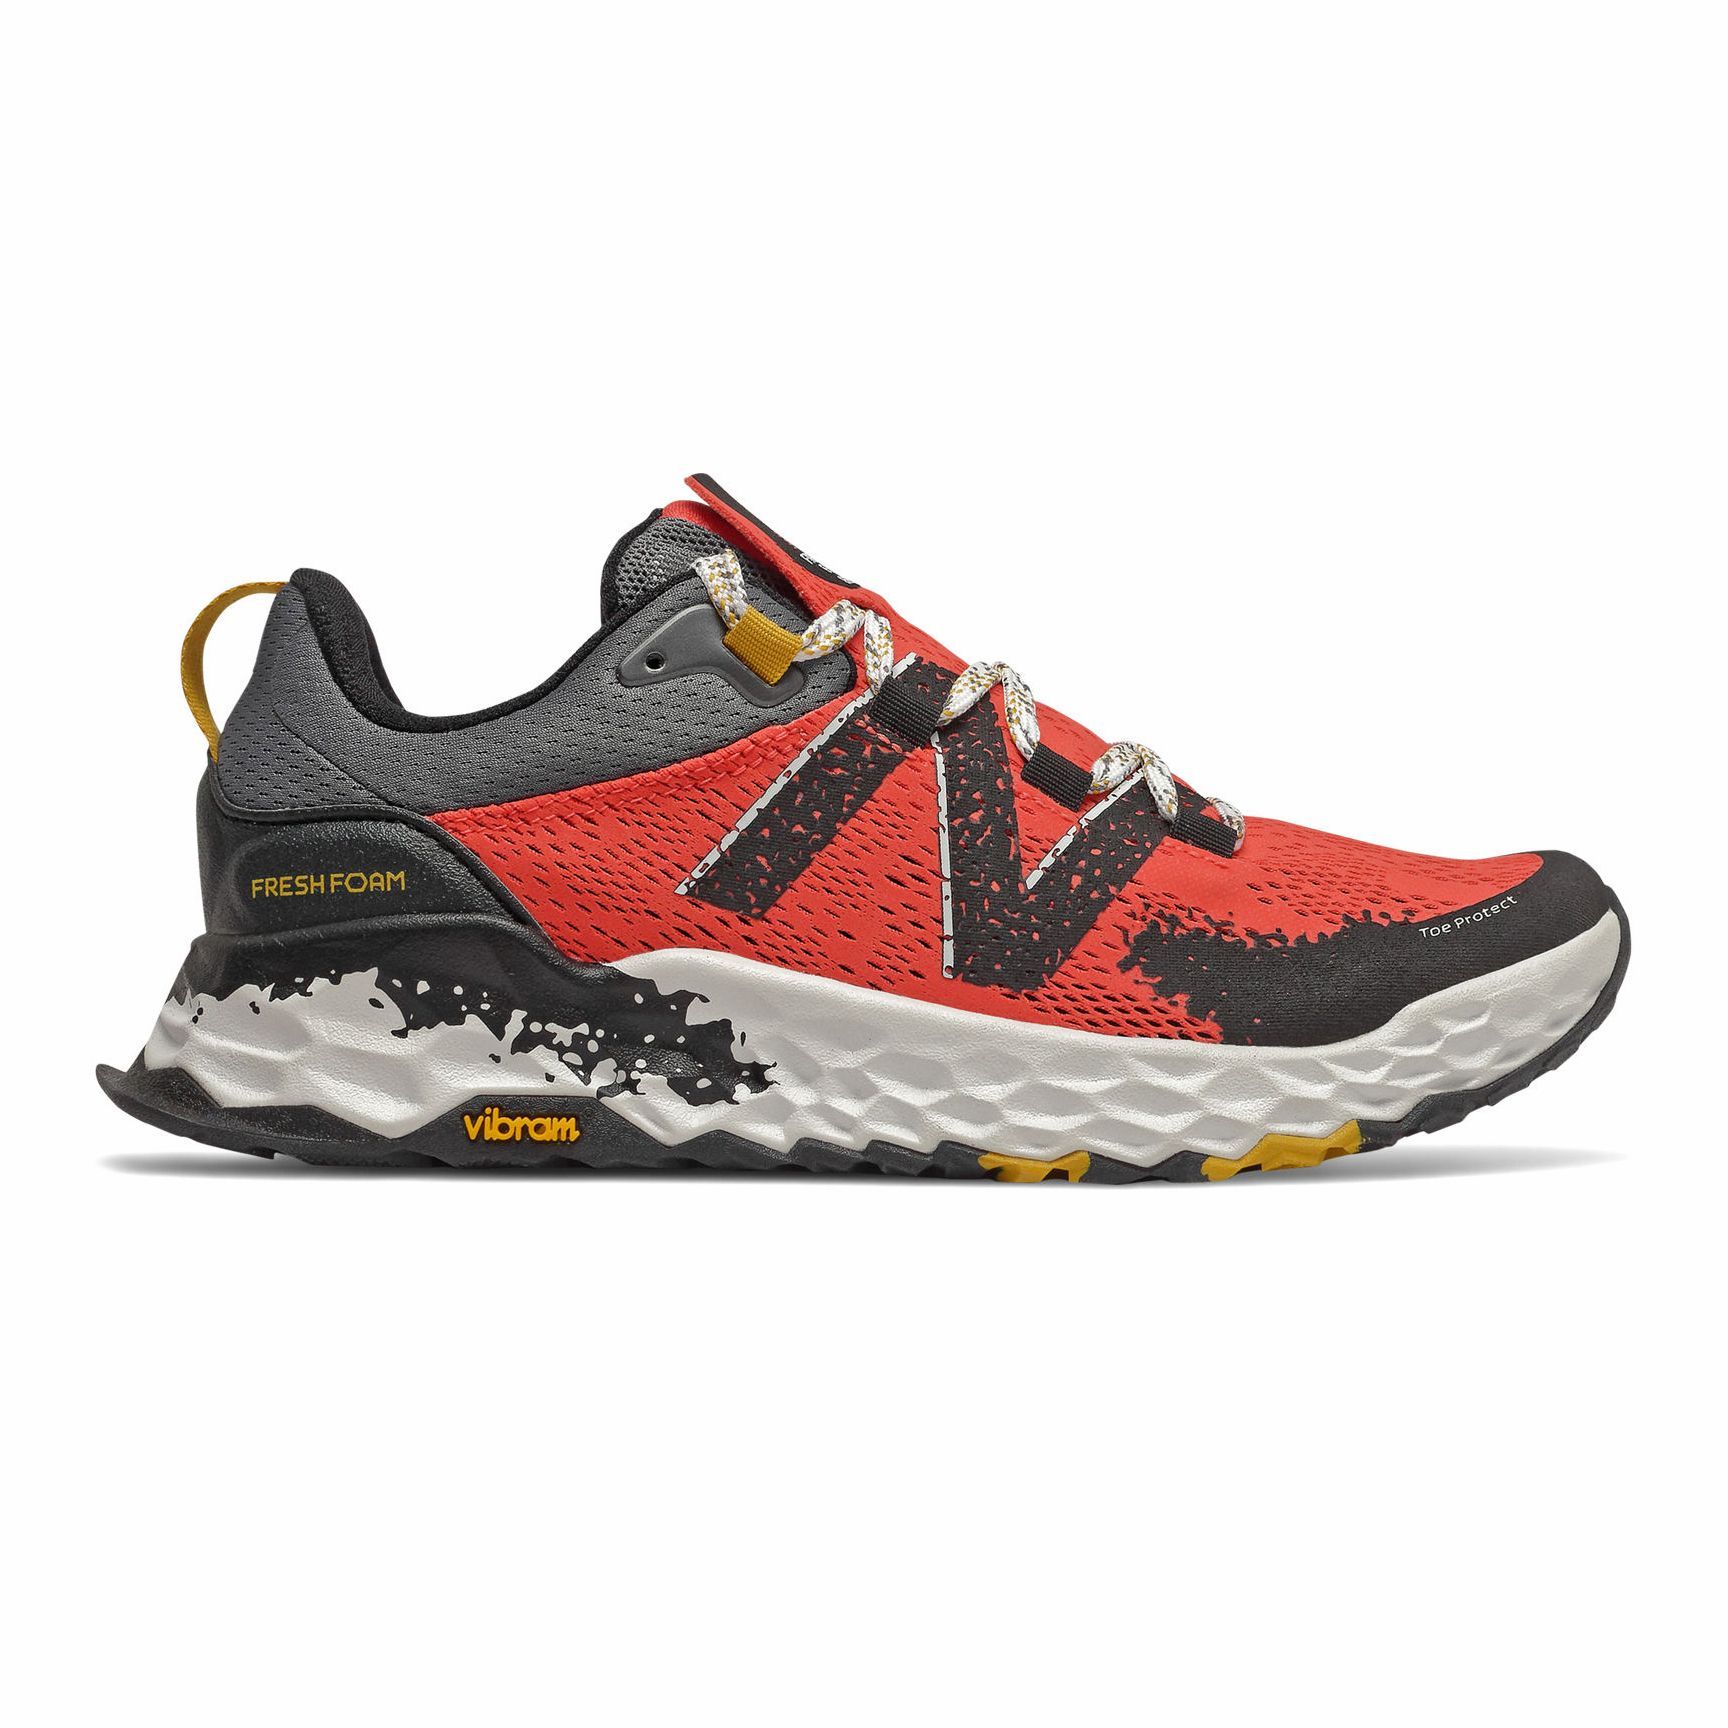 New Balance Sale - Take an Extra 25% off These Running Shoes طريقة الصابونيه